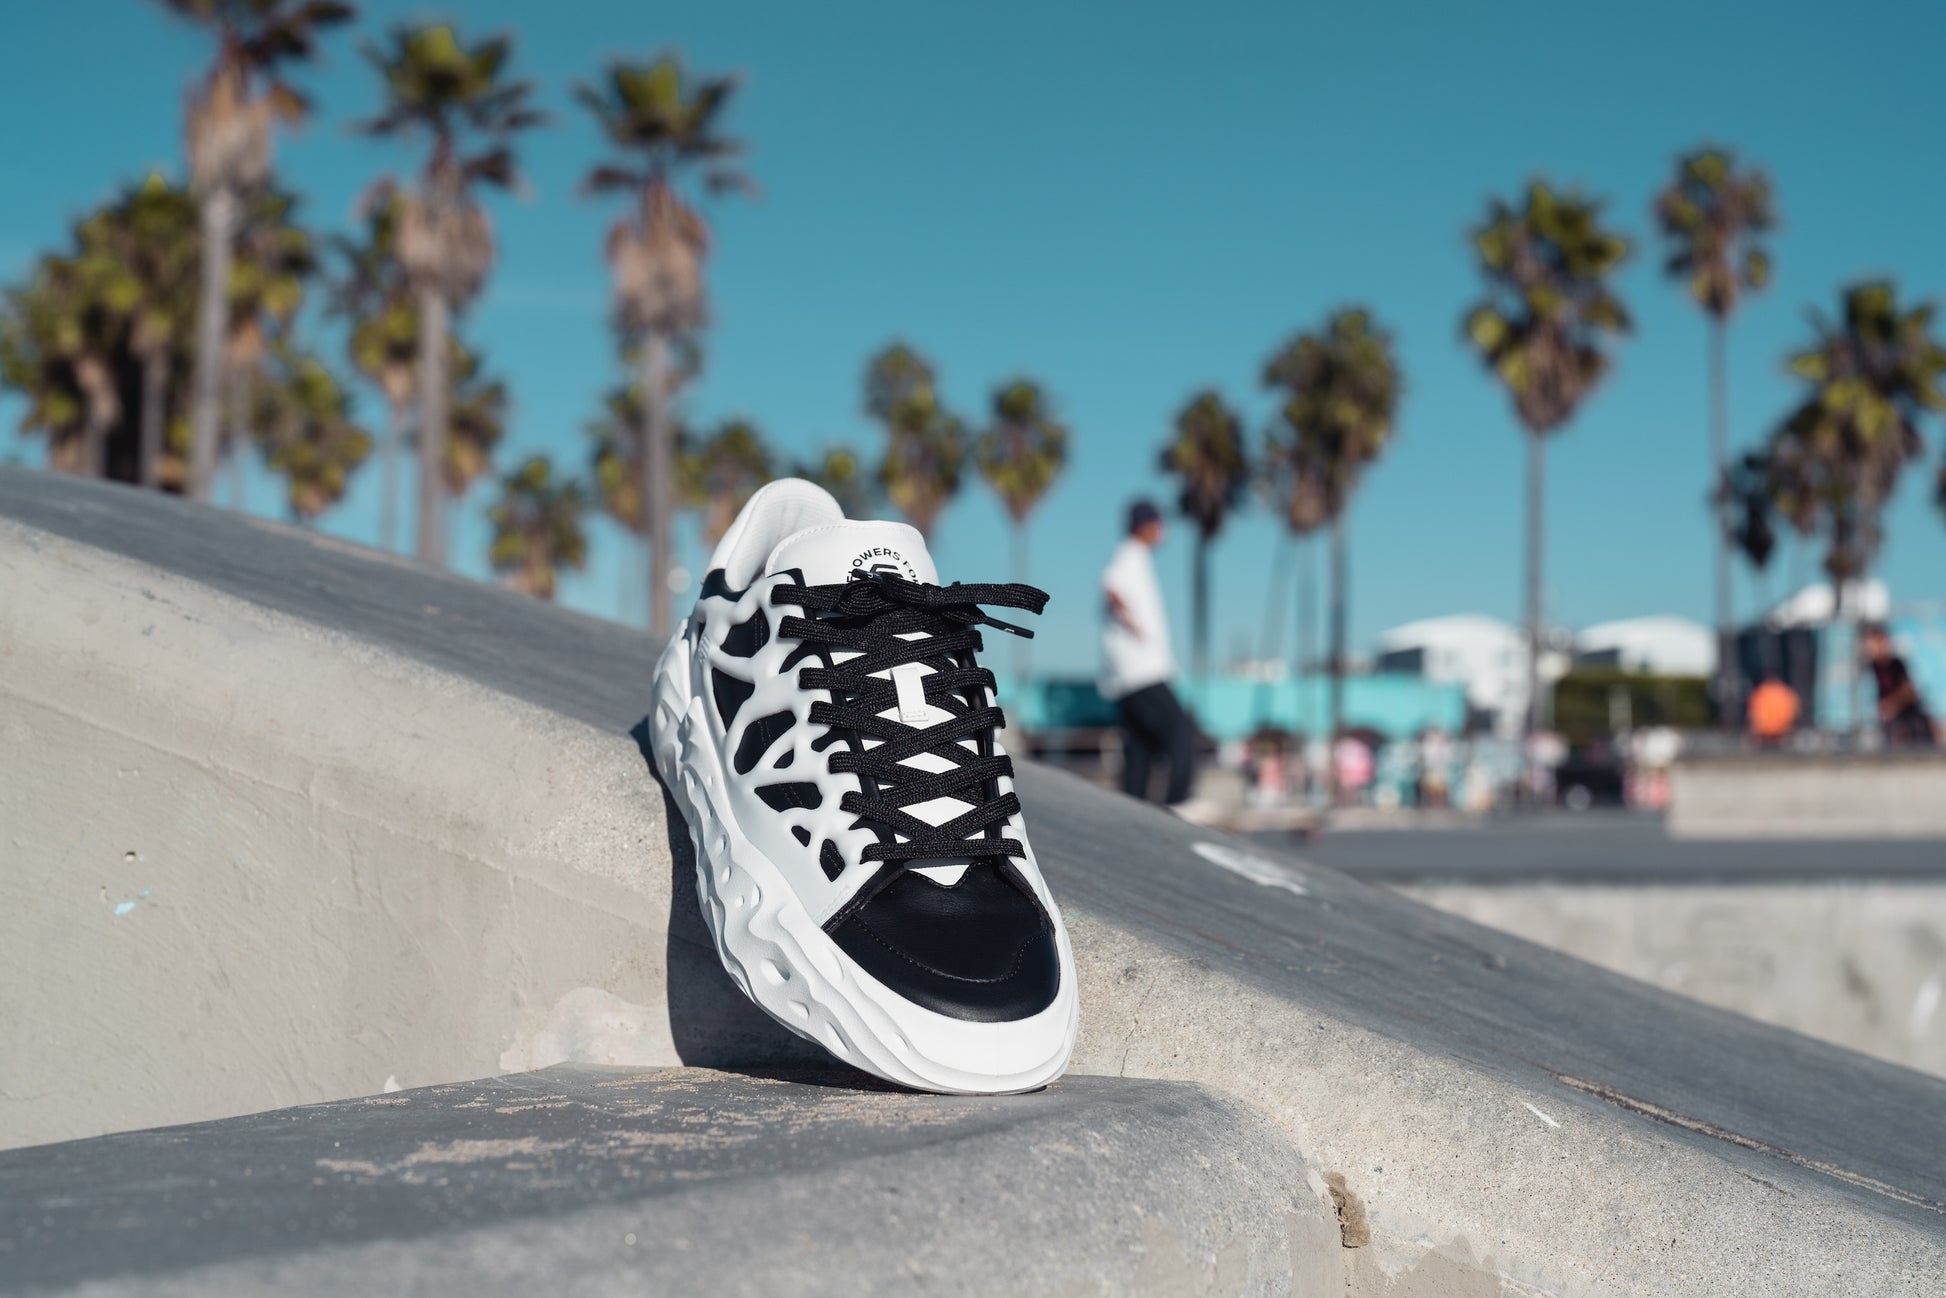 Flowers For Society Sneaker Radicle Orca black white sideview on a concrete bench street palm trees in the background